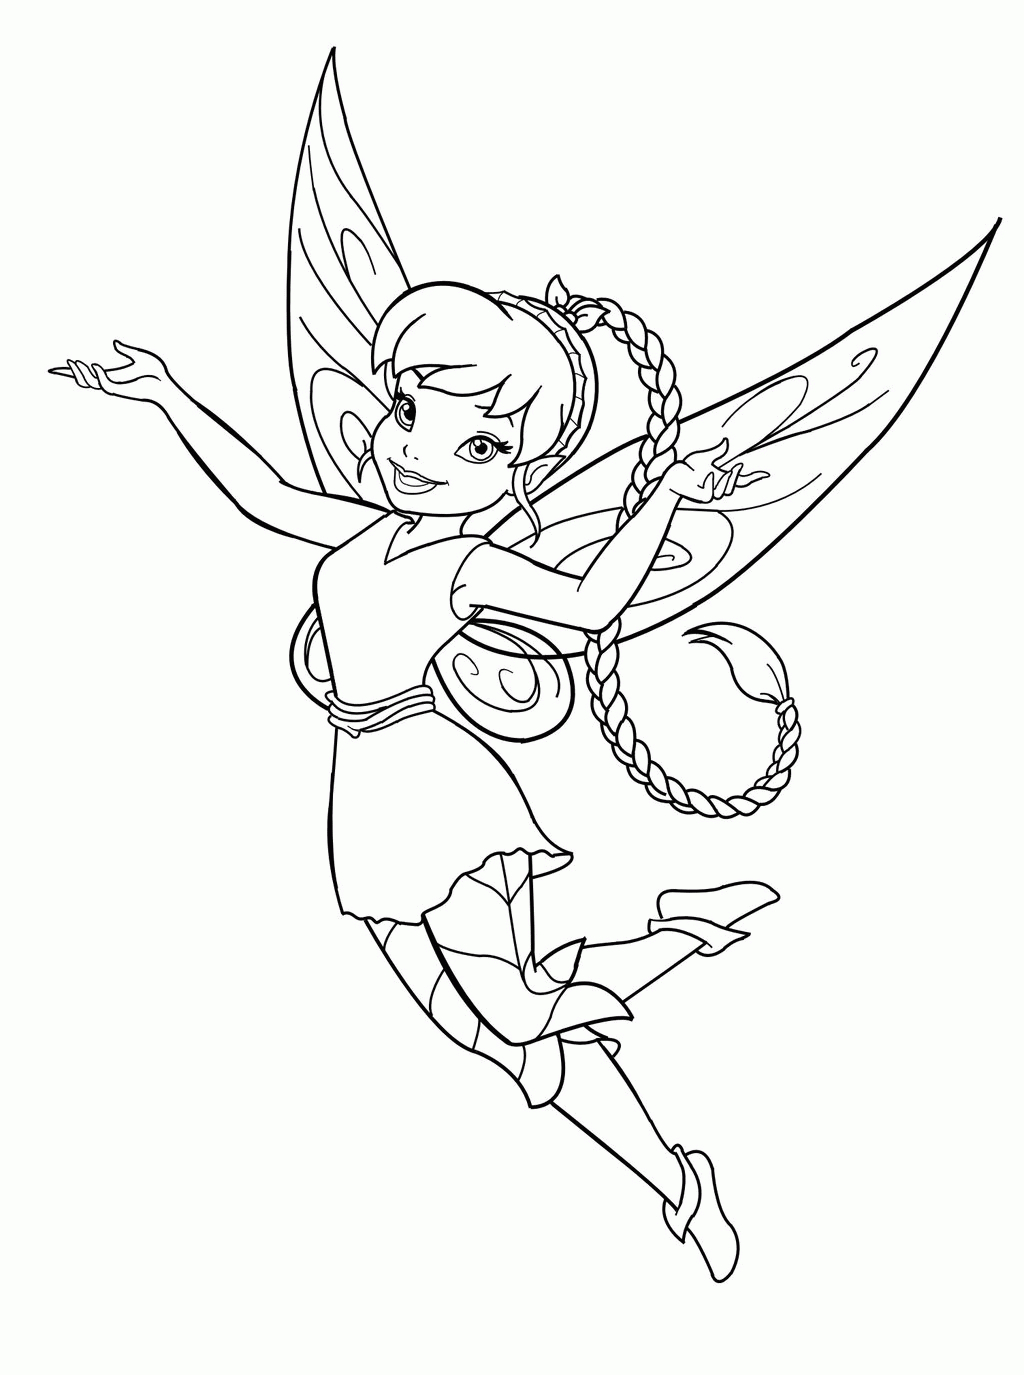 Free Coloring Pages Of Fairies Amazing Of Free Coloring Page Fairy About Fairy Coloring 984